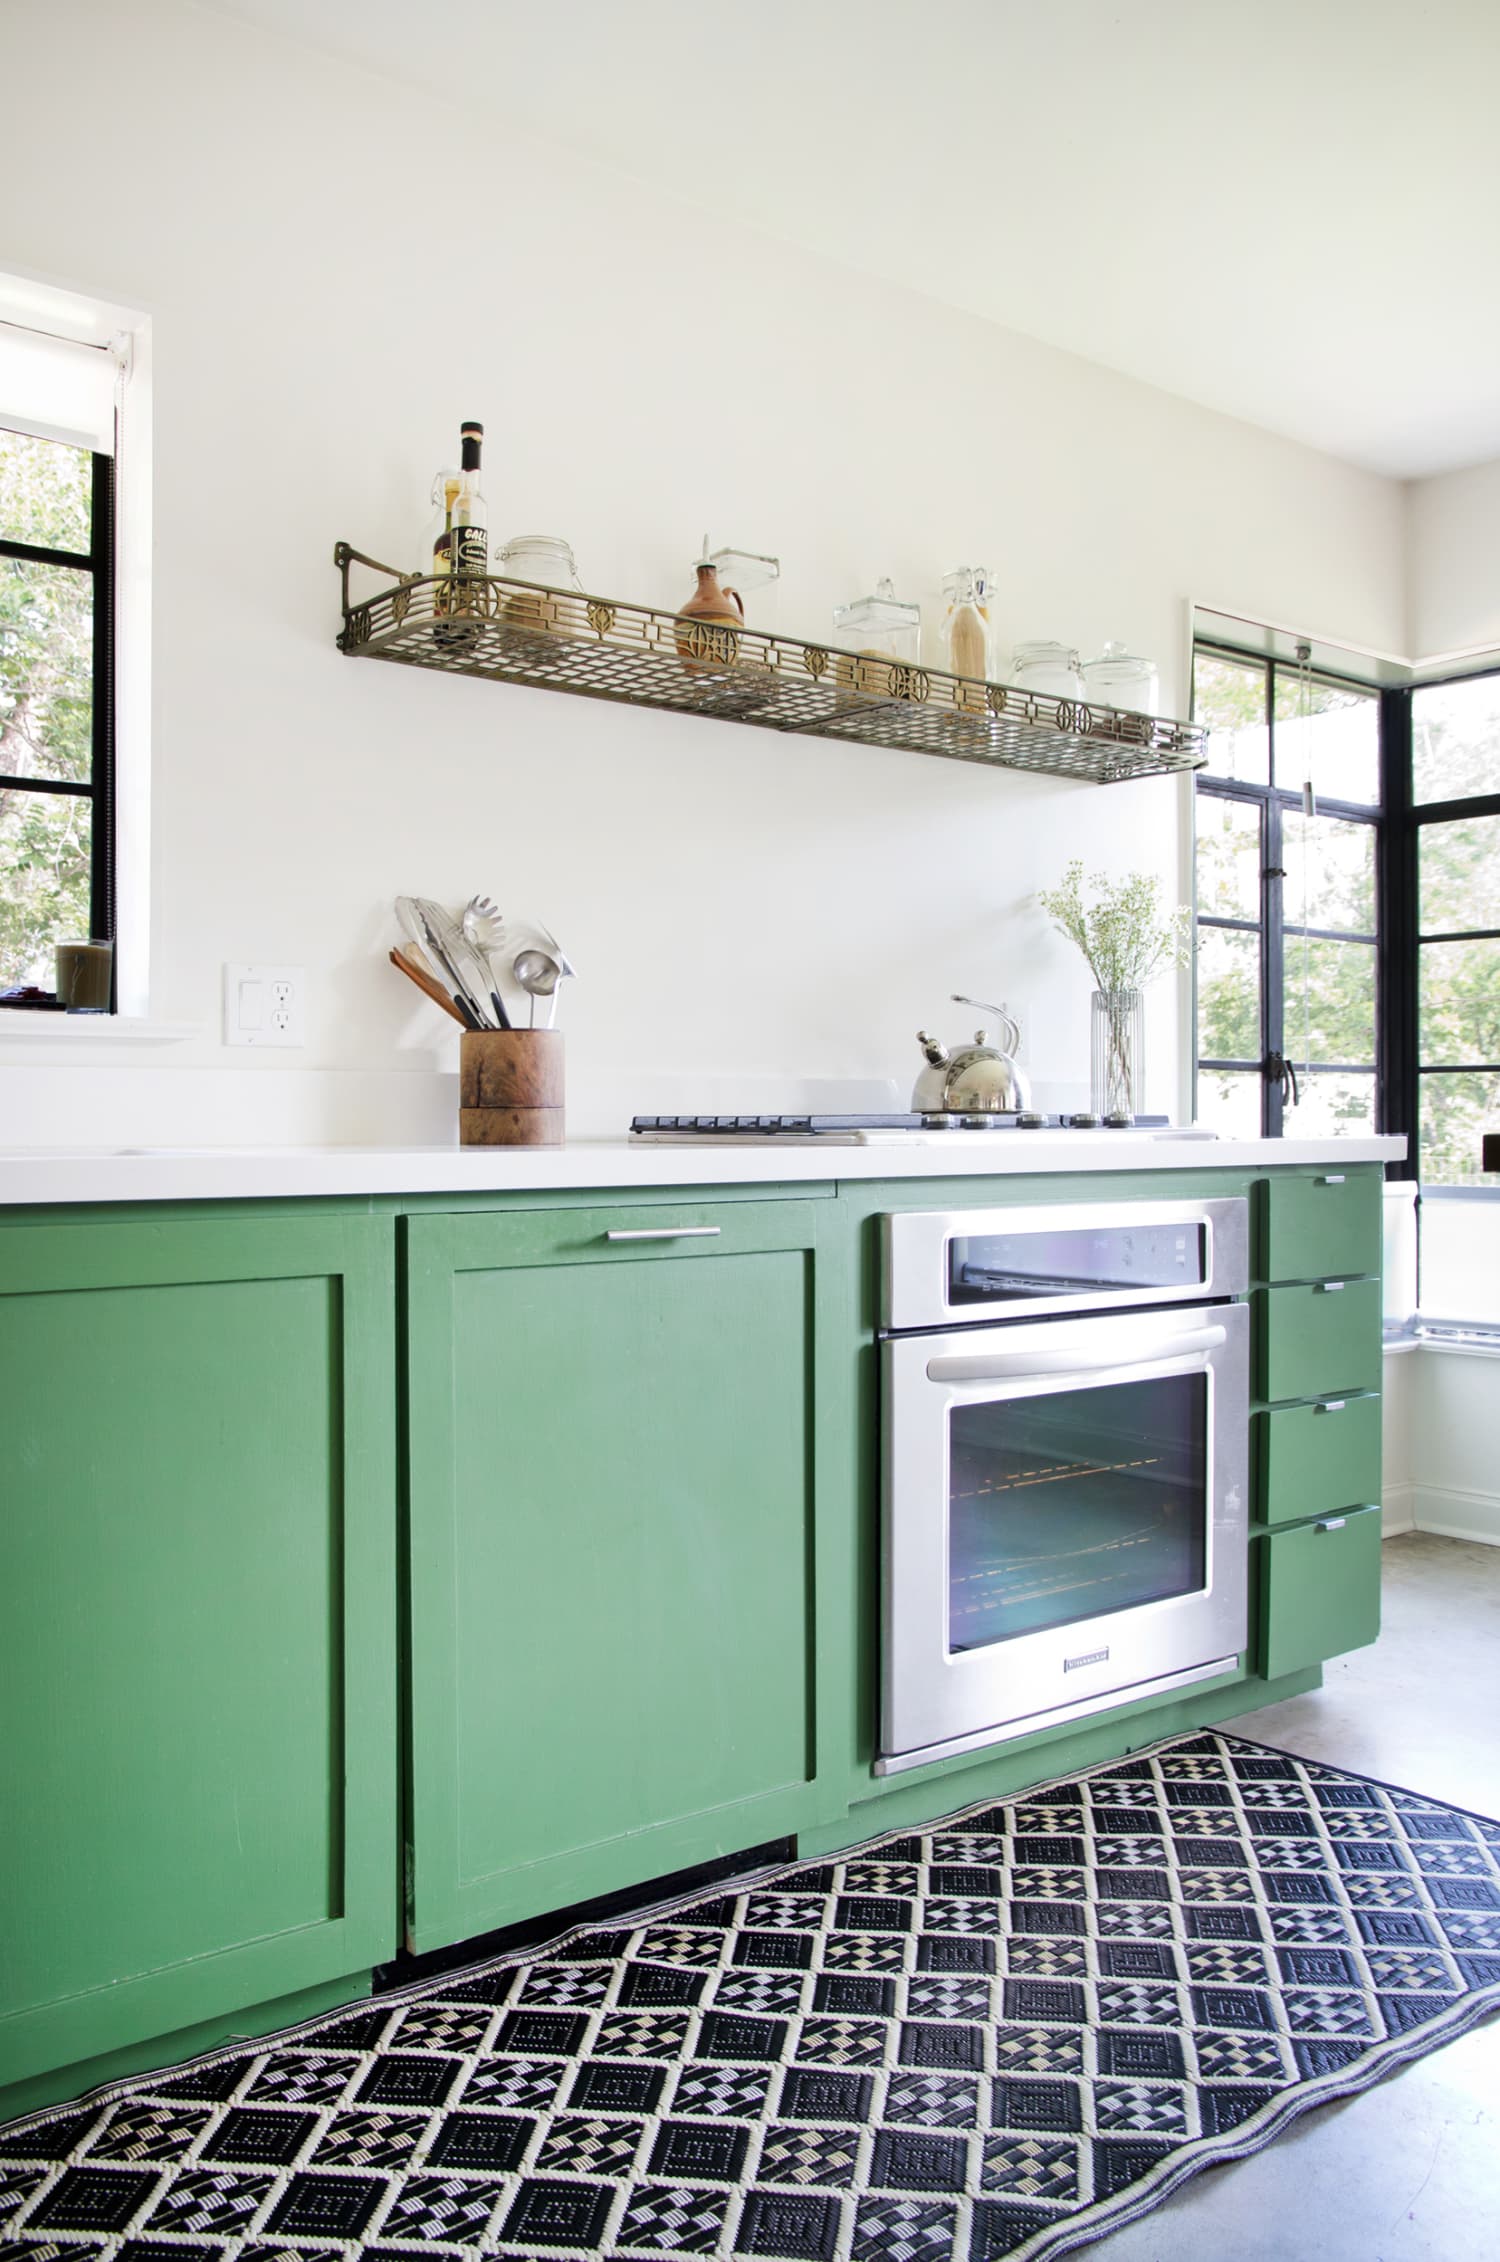 How Much Does It Cost to Paint Kitchen Cabinets? | Kitchn